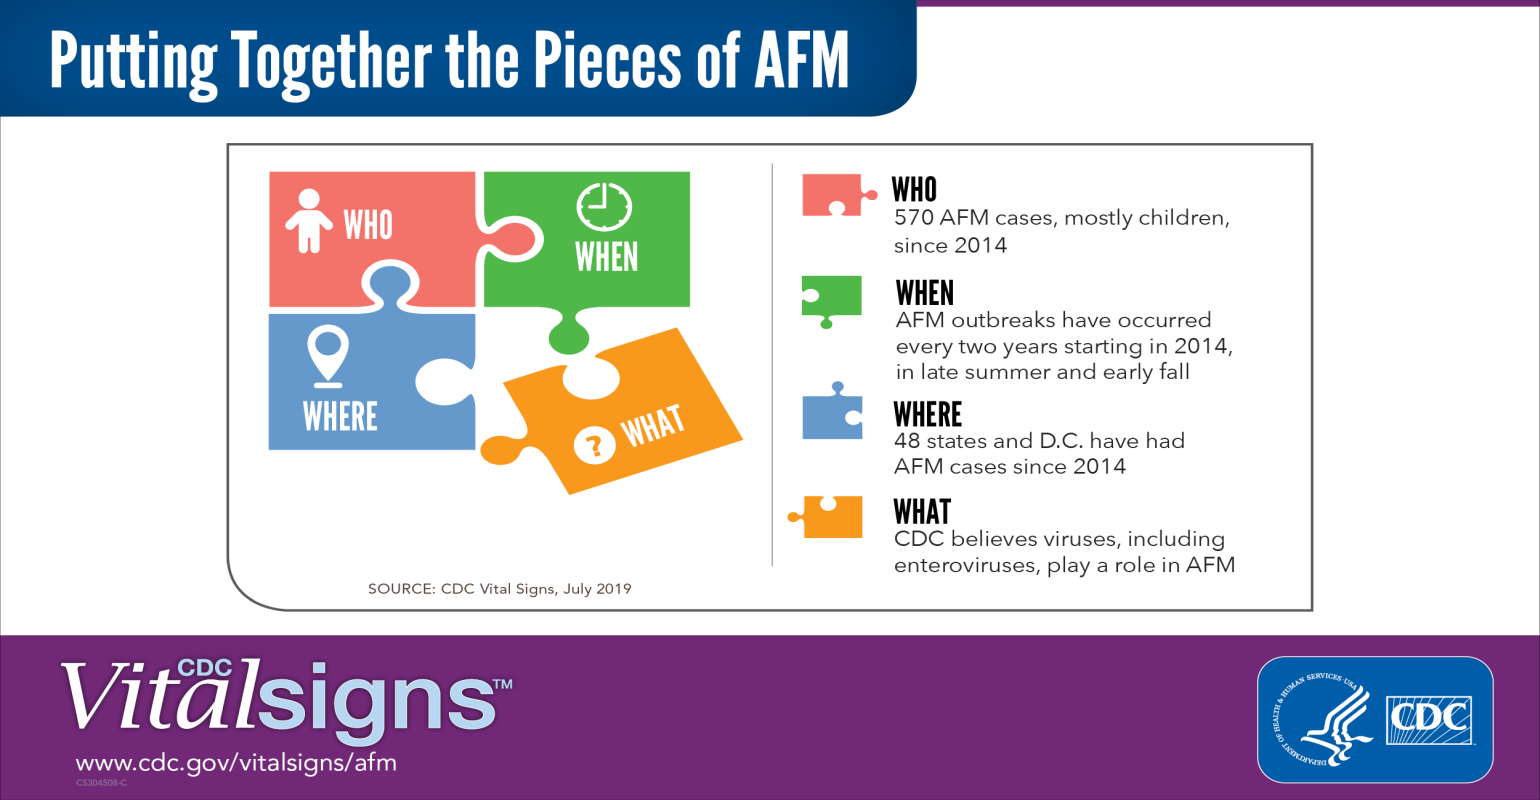 CDC Urges Clinicians to Rapidly Recognize and Report AFM Cases